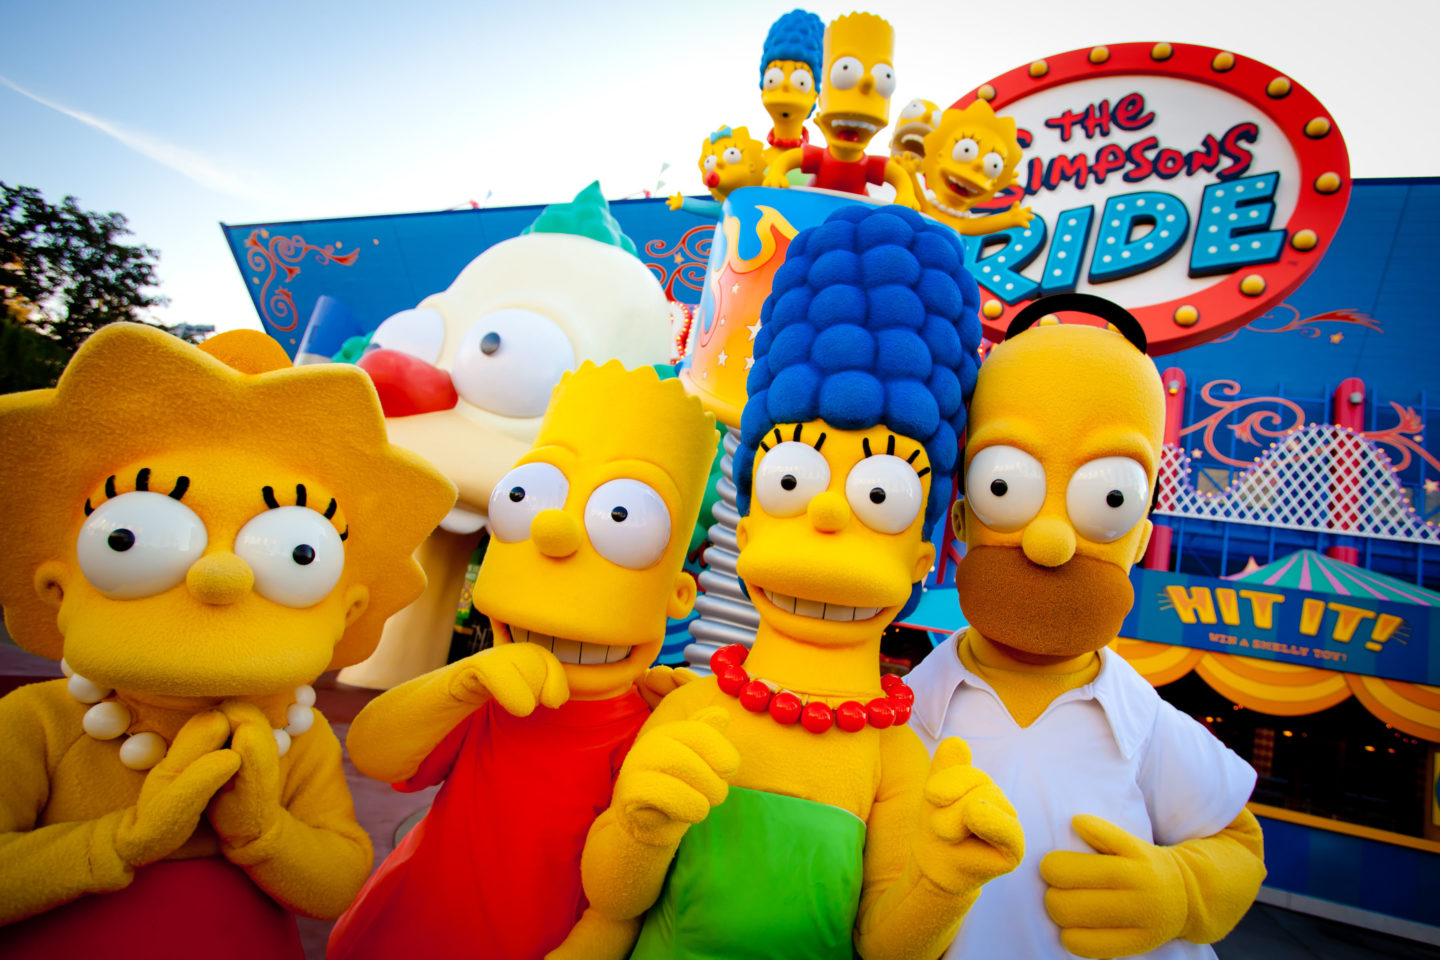 Can't Miss Attractions at Universal Studios The Simpsons Ride